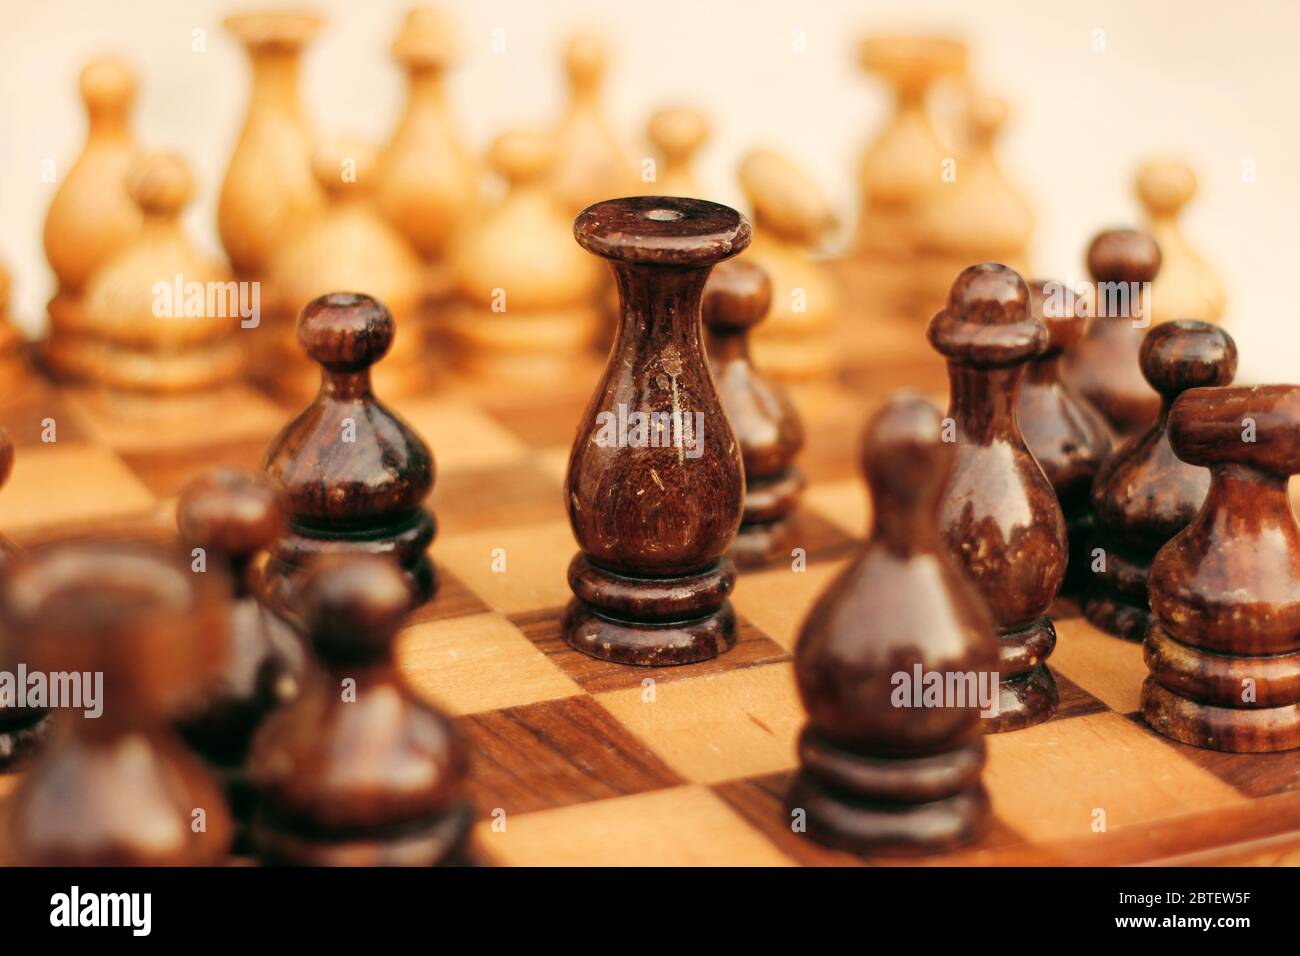 A Beautiful Brown Wooden Chess Board With king In Focus. Stock Photo